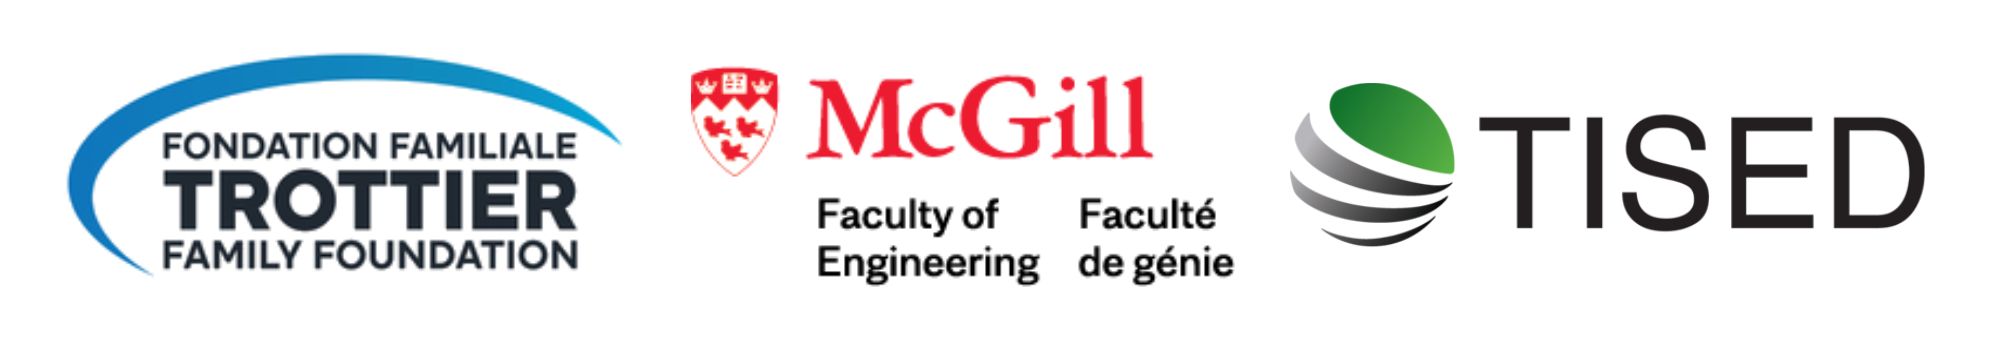 trottier family foundation, mcgill engineering and tised logos